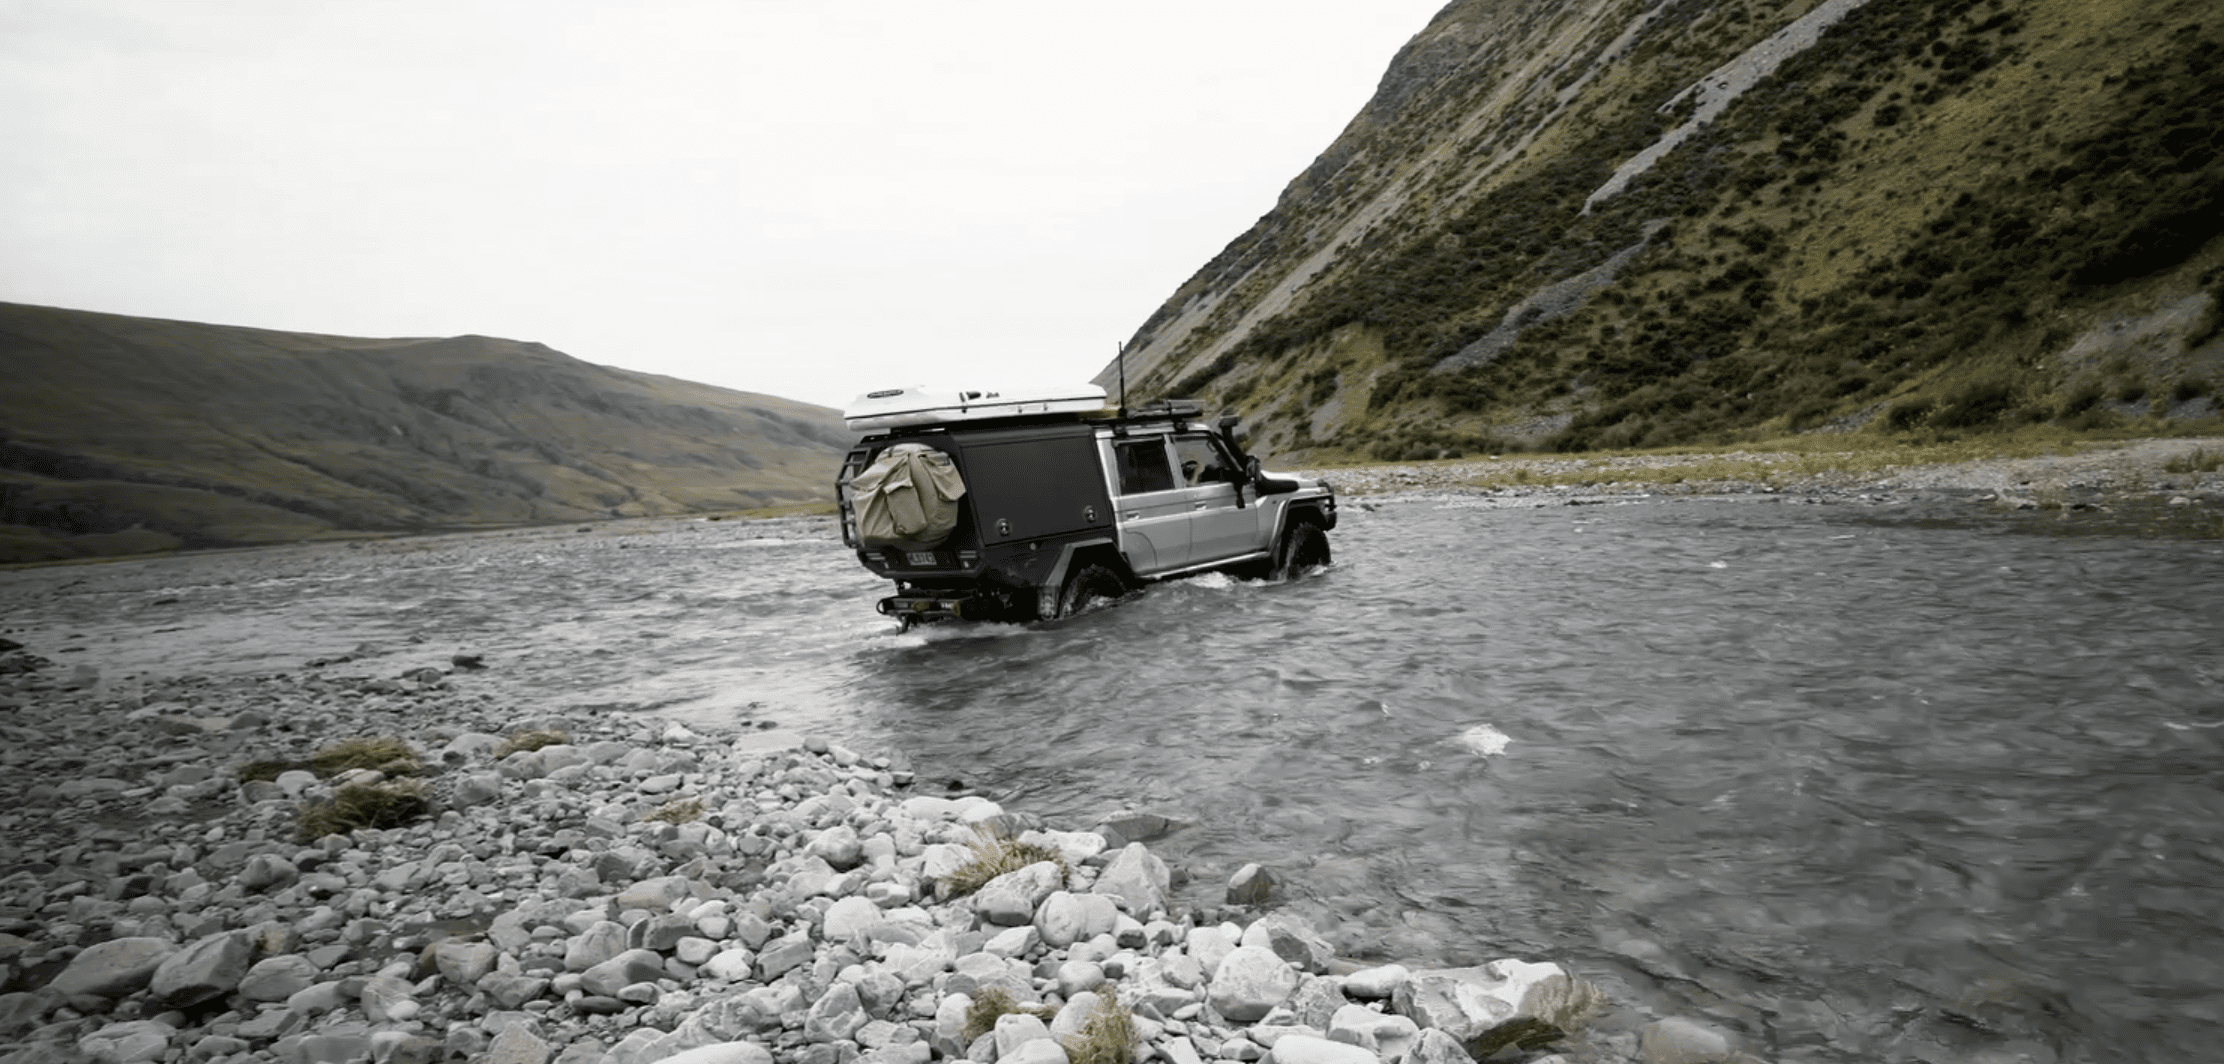 How to safely cross rivers in your 4wd : overlanding